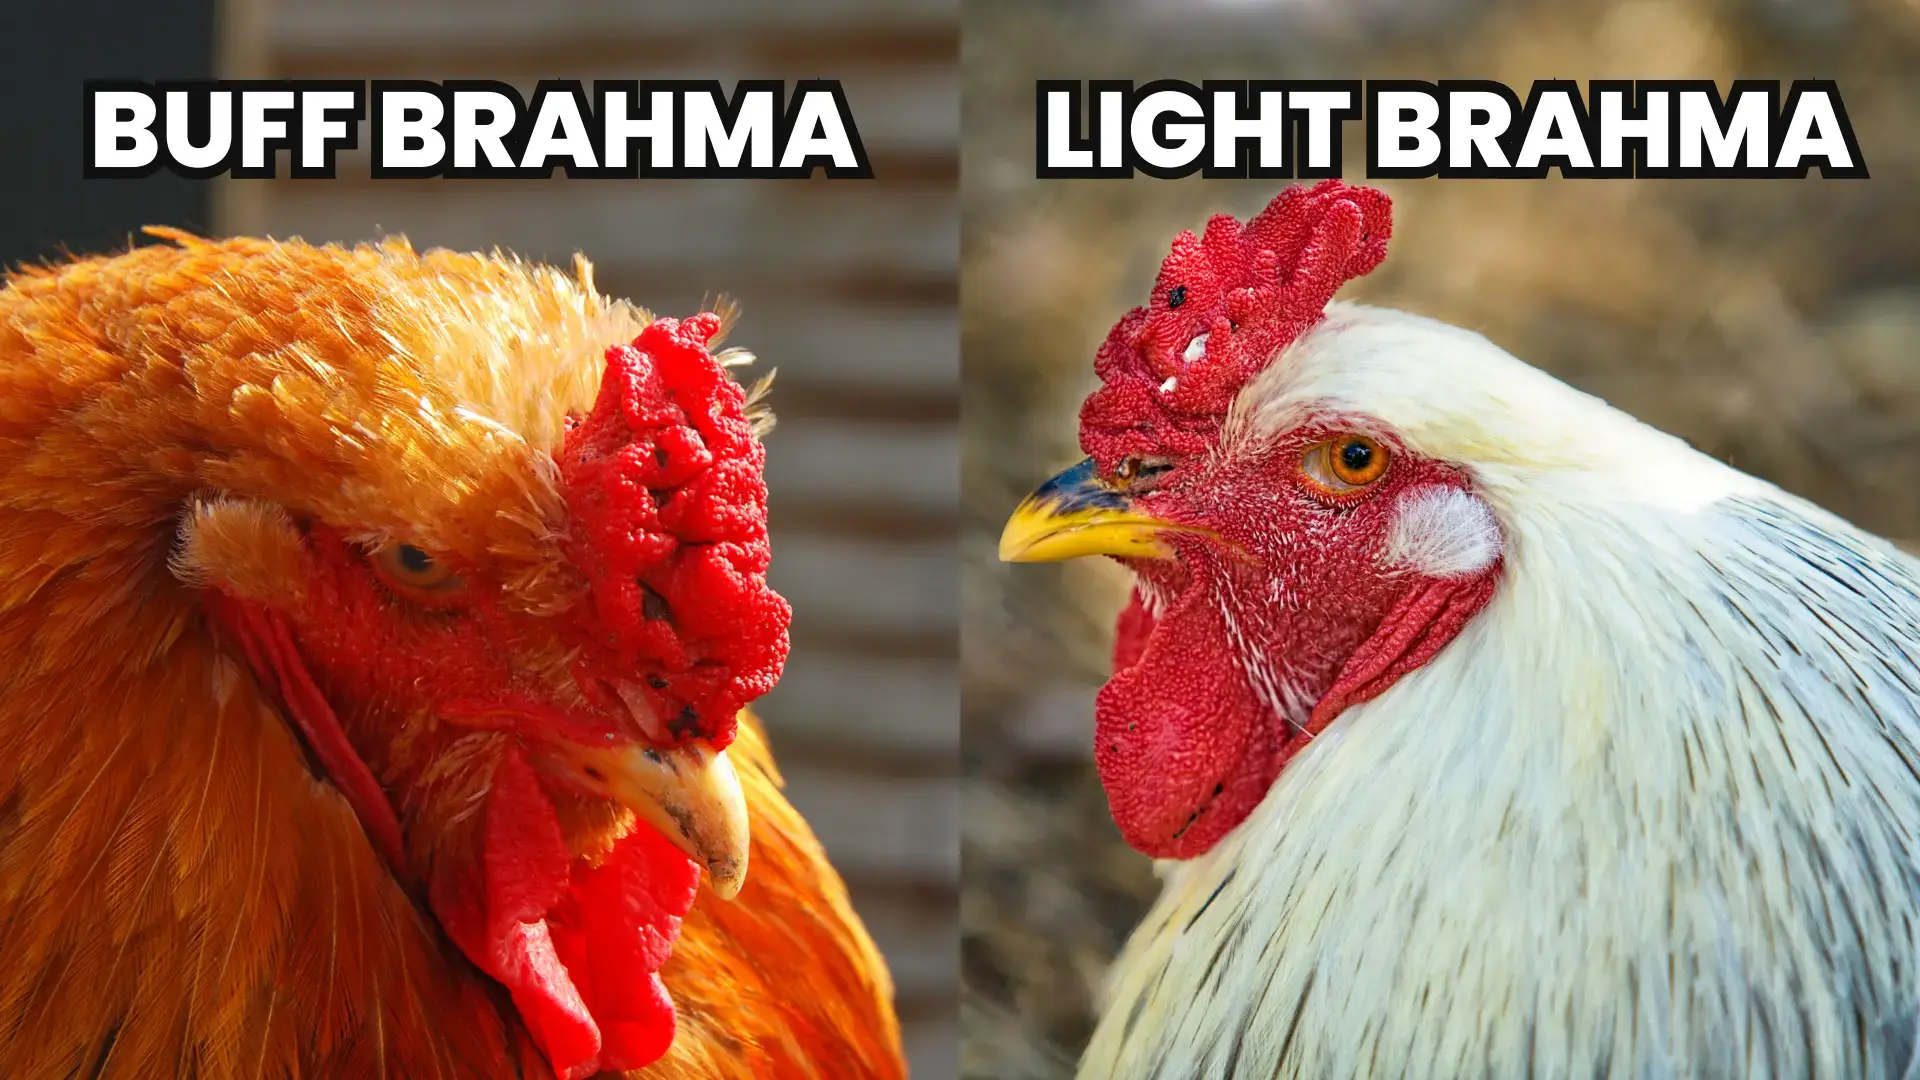 Buff Brahma Chicken with the Excessive Multi-colored Plumage that